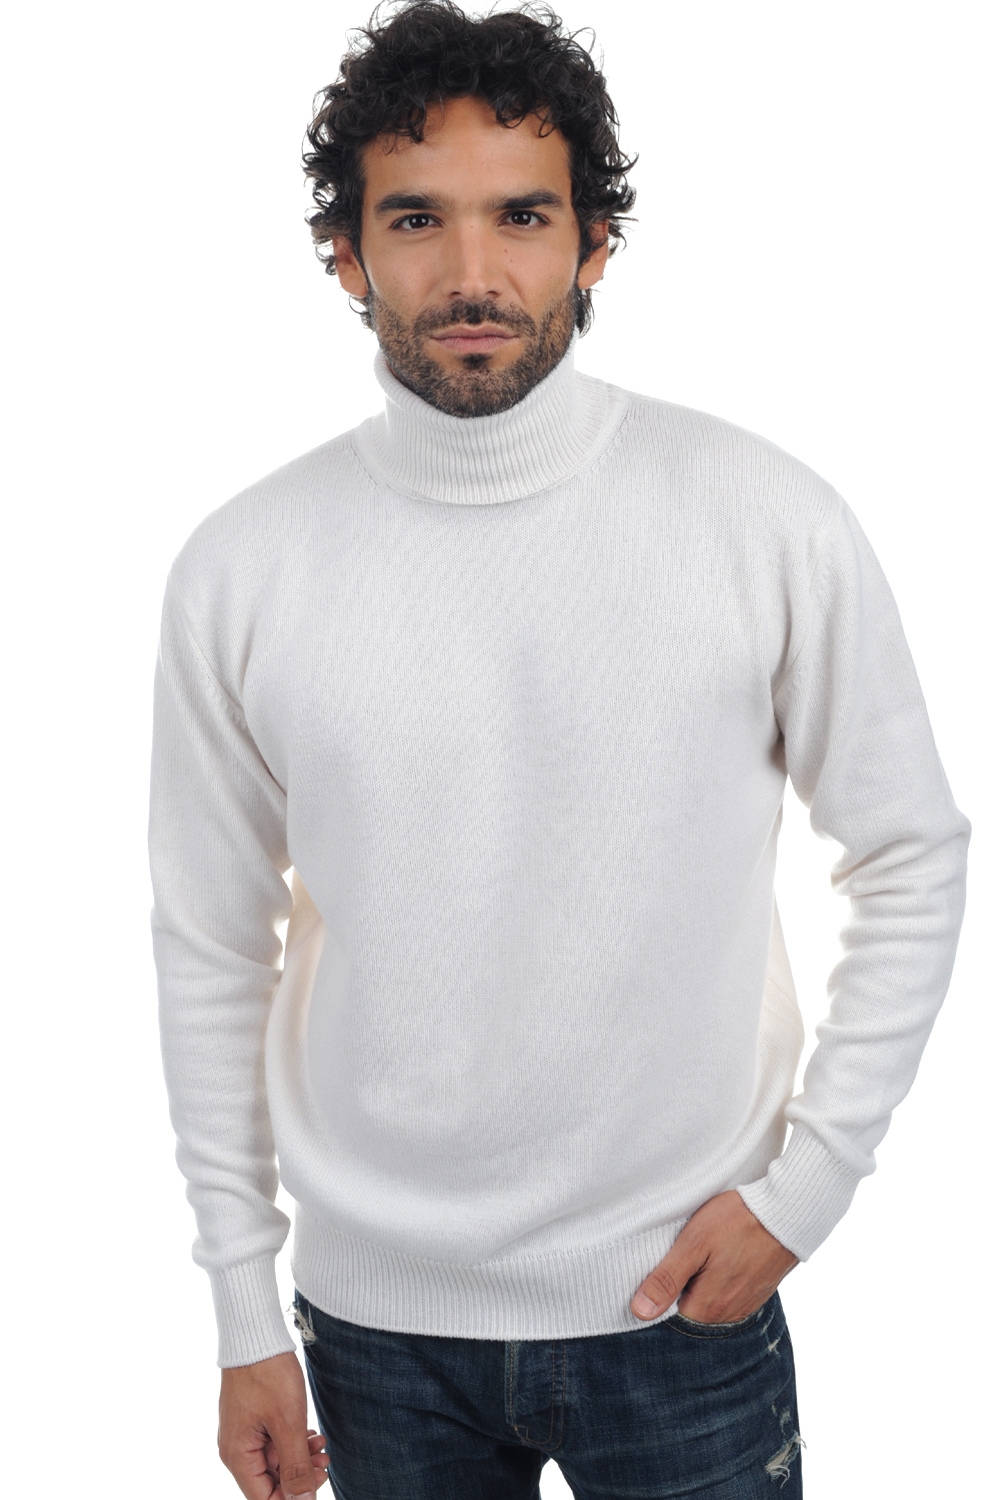 Cachemire pull homme col roule edgar 4f blanc casse m